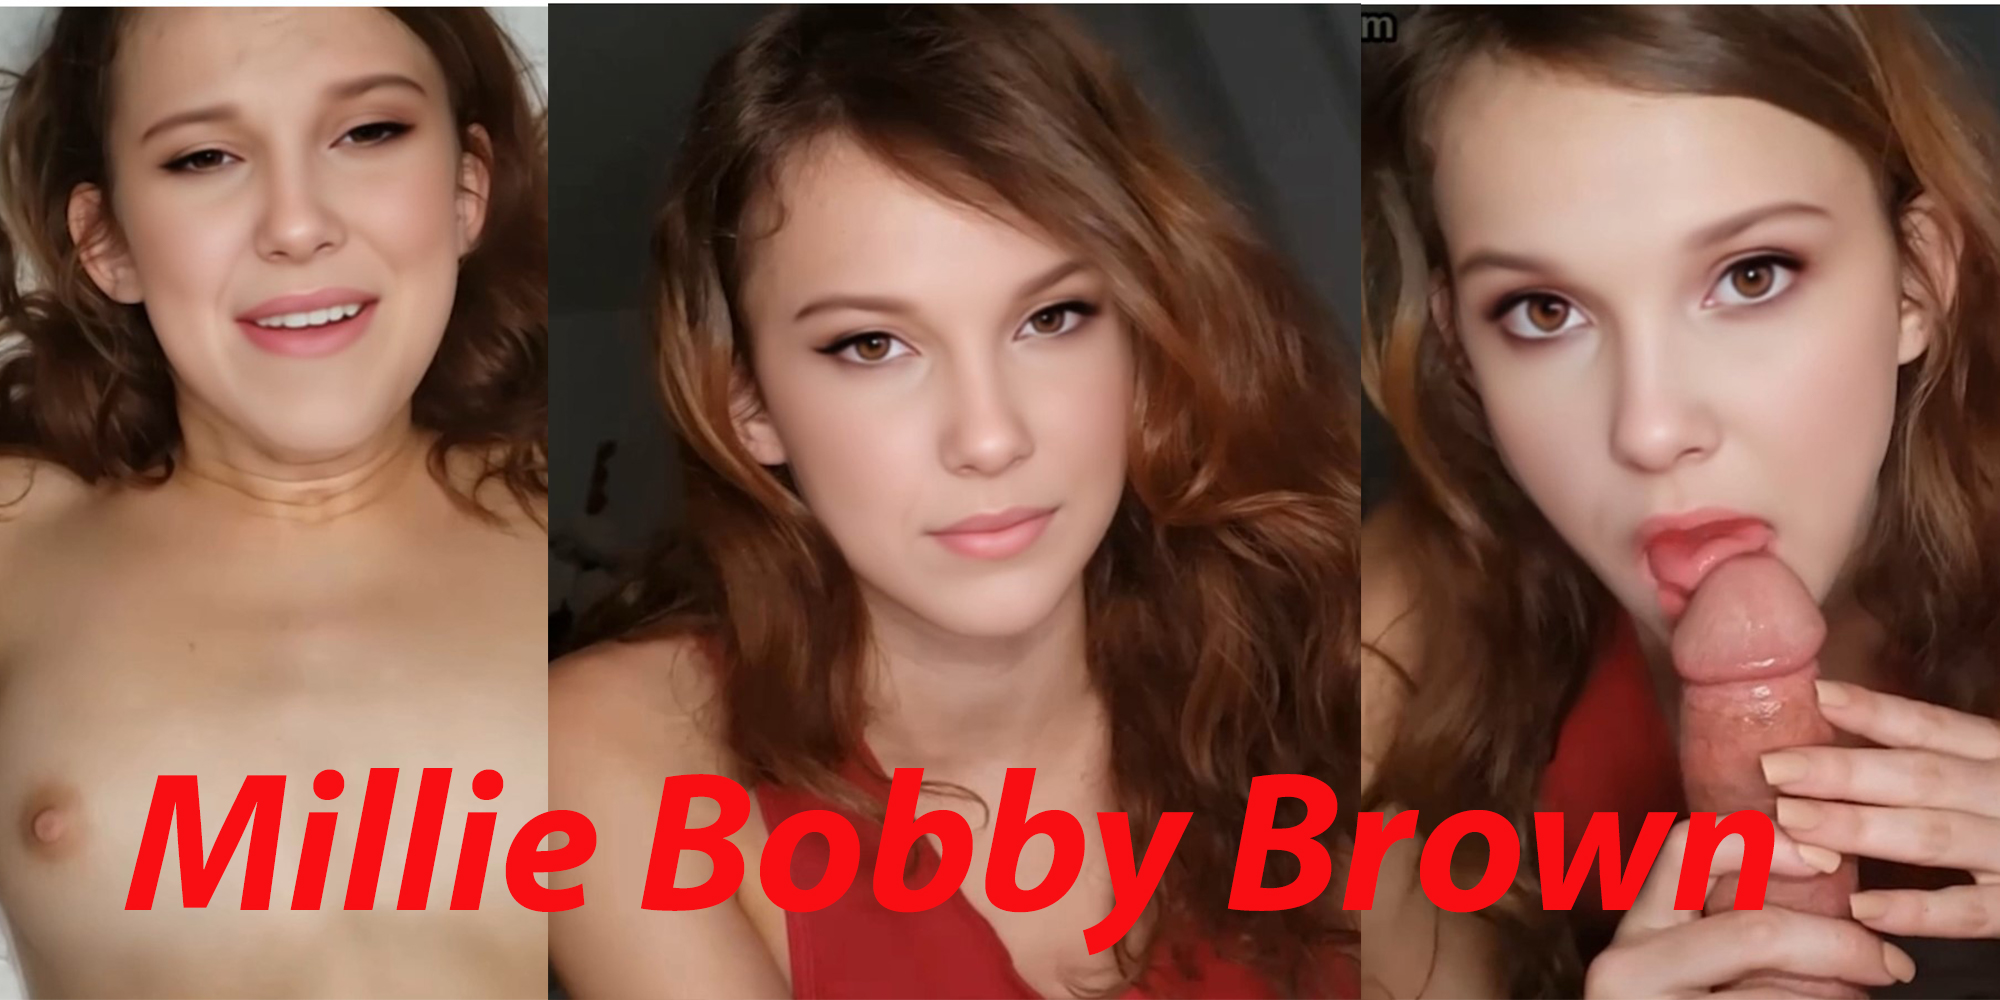 Millie Bobby Brown sleeps with you (reupload)